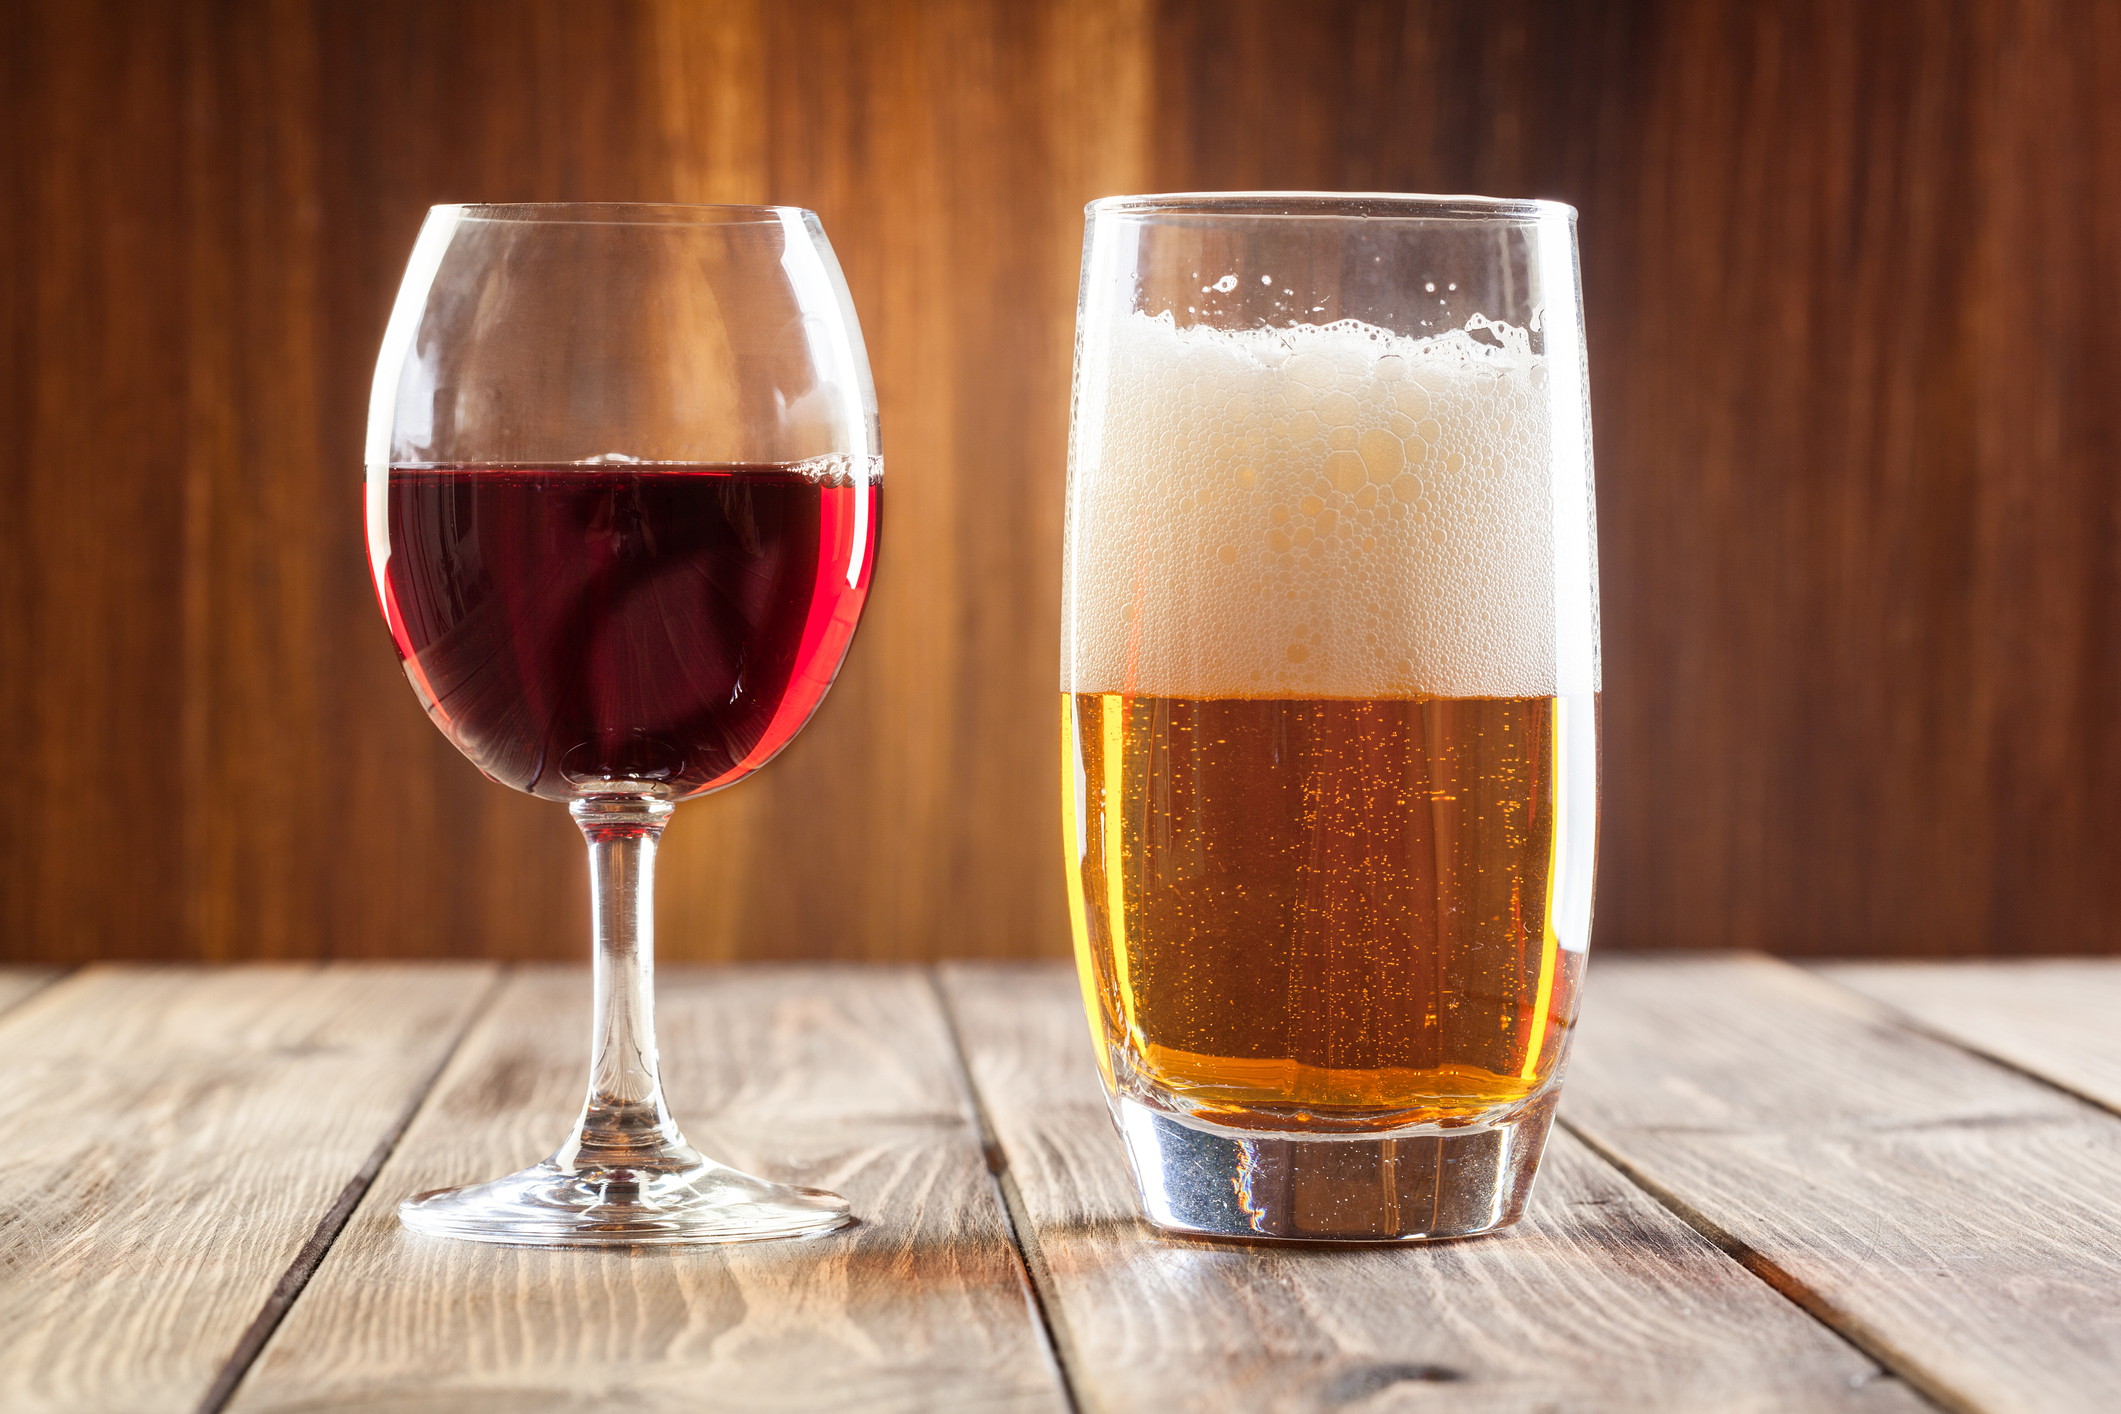 Wine vs beer: One of these carries a higher stroke risk